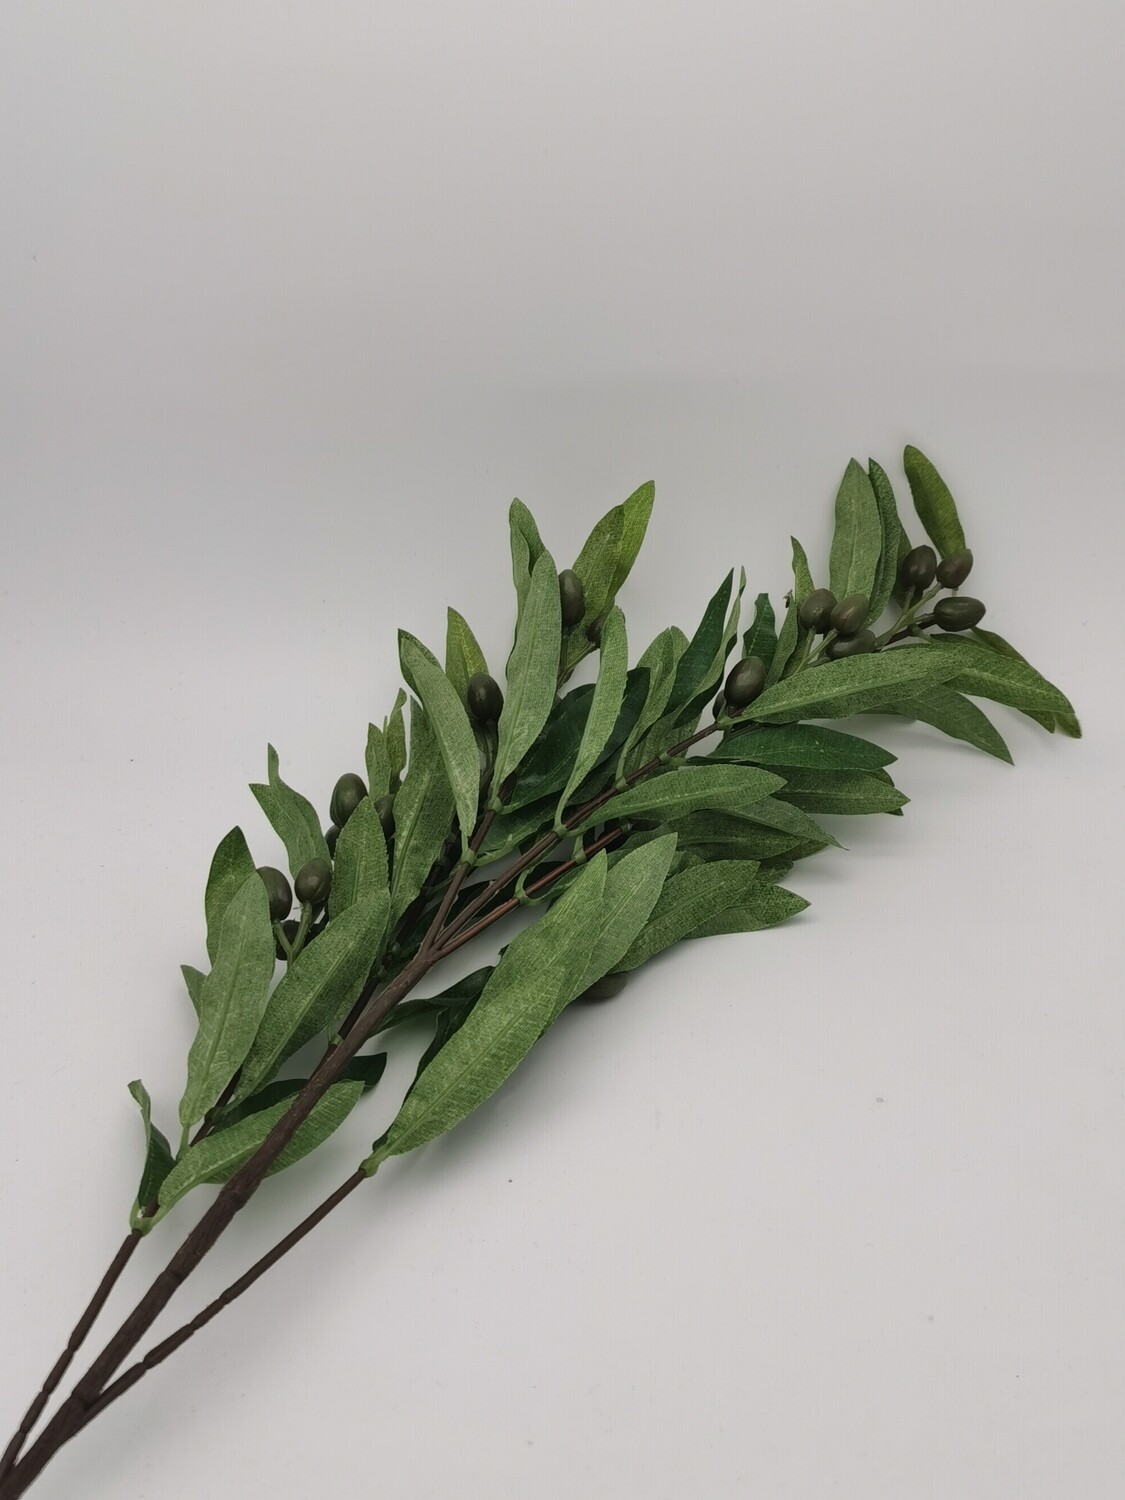 Olive Branch with Green Olives - Display Imitation 65cm Long